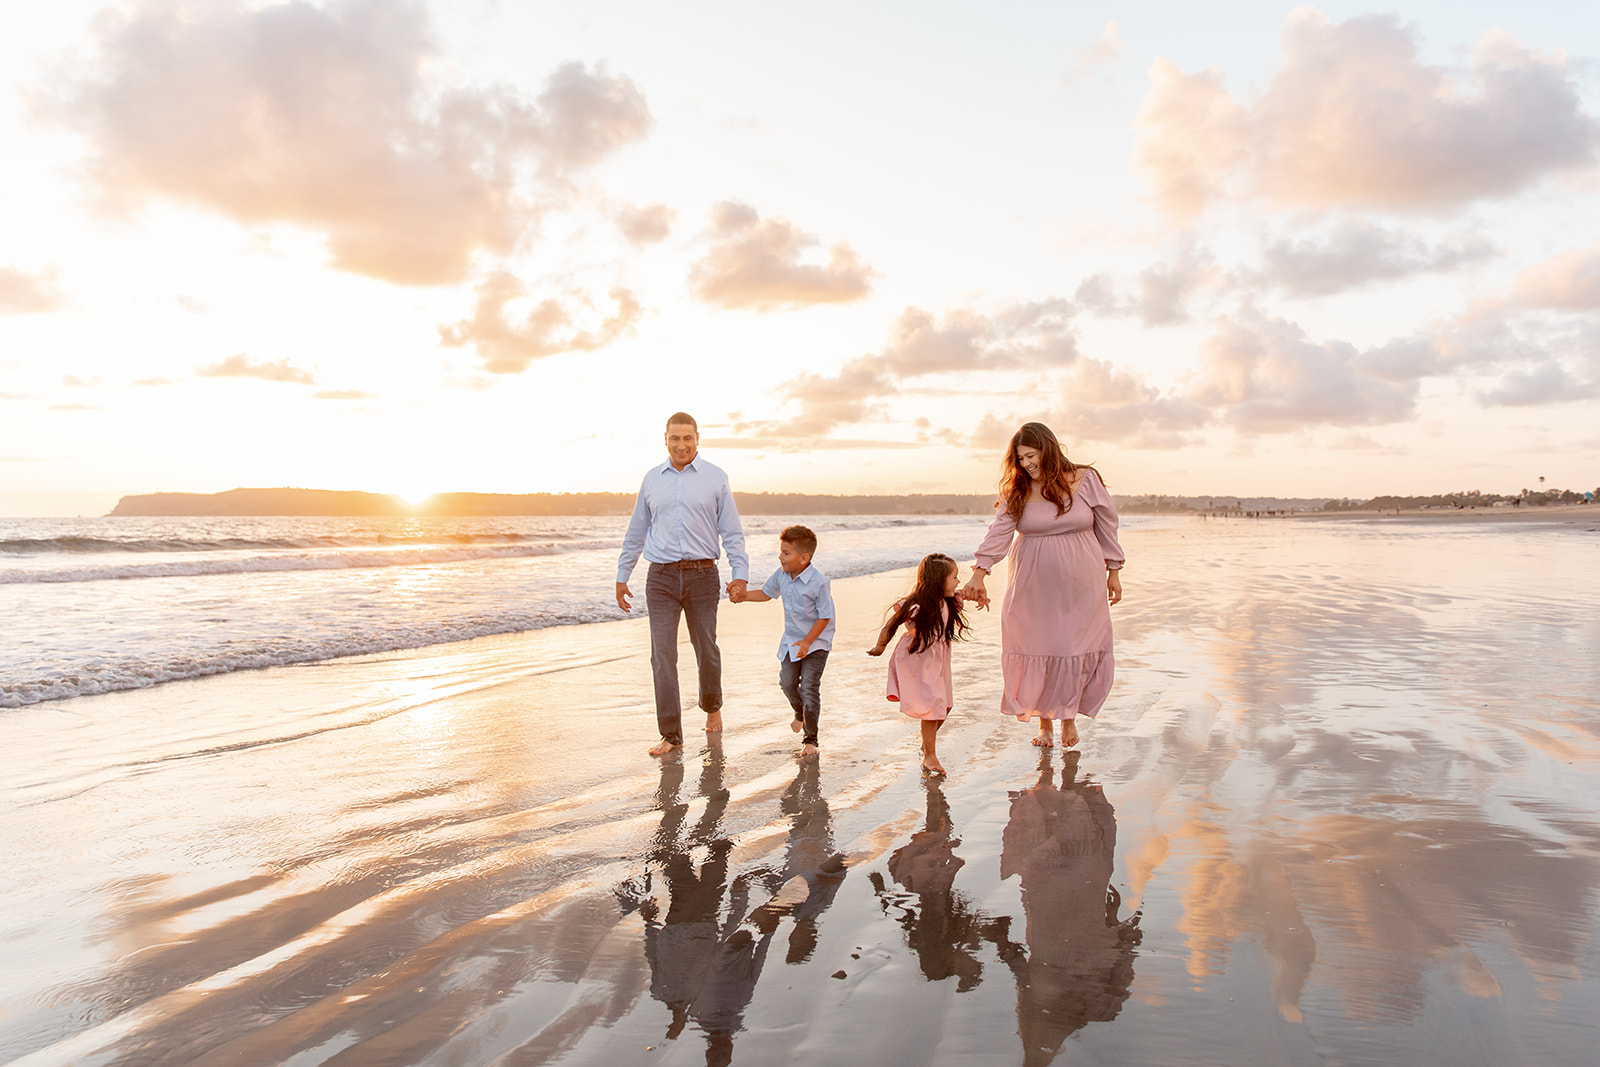 A mother and father walk down a wet beach holding hands with their young son and daughter in matching outfits on one of the Best san diego beaches for families